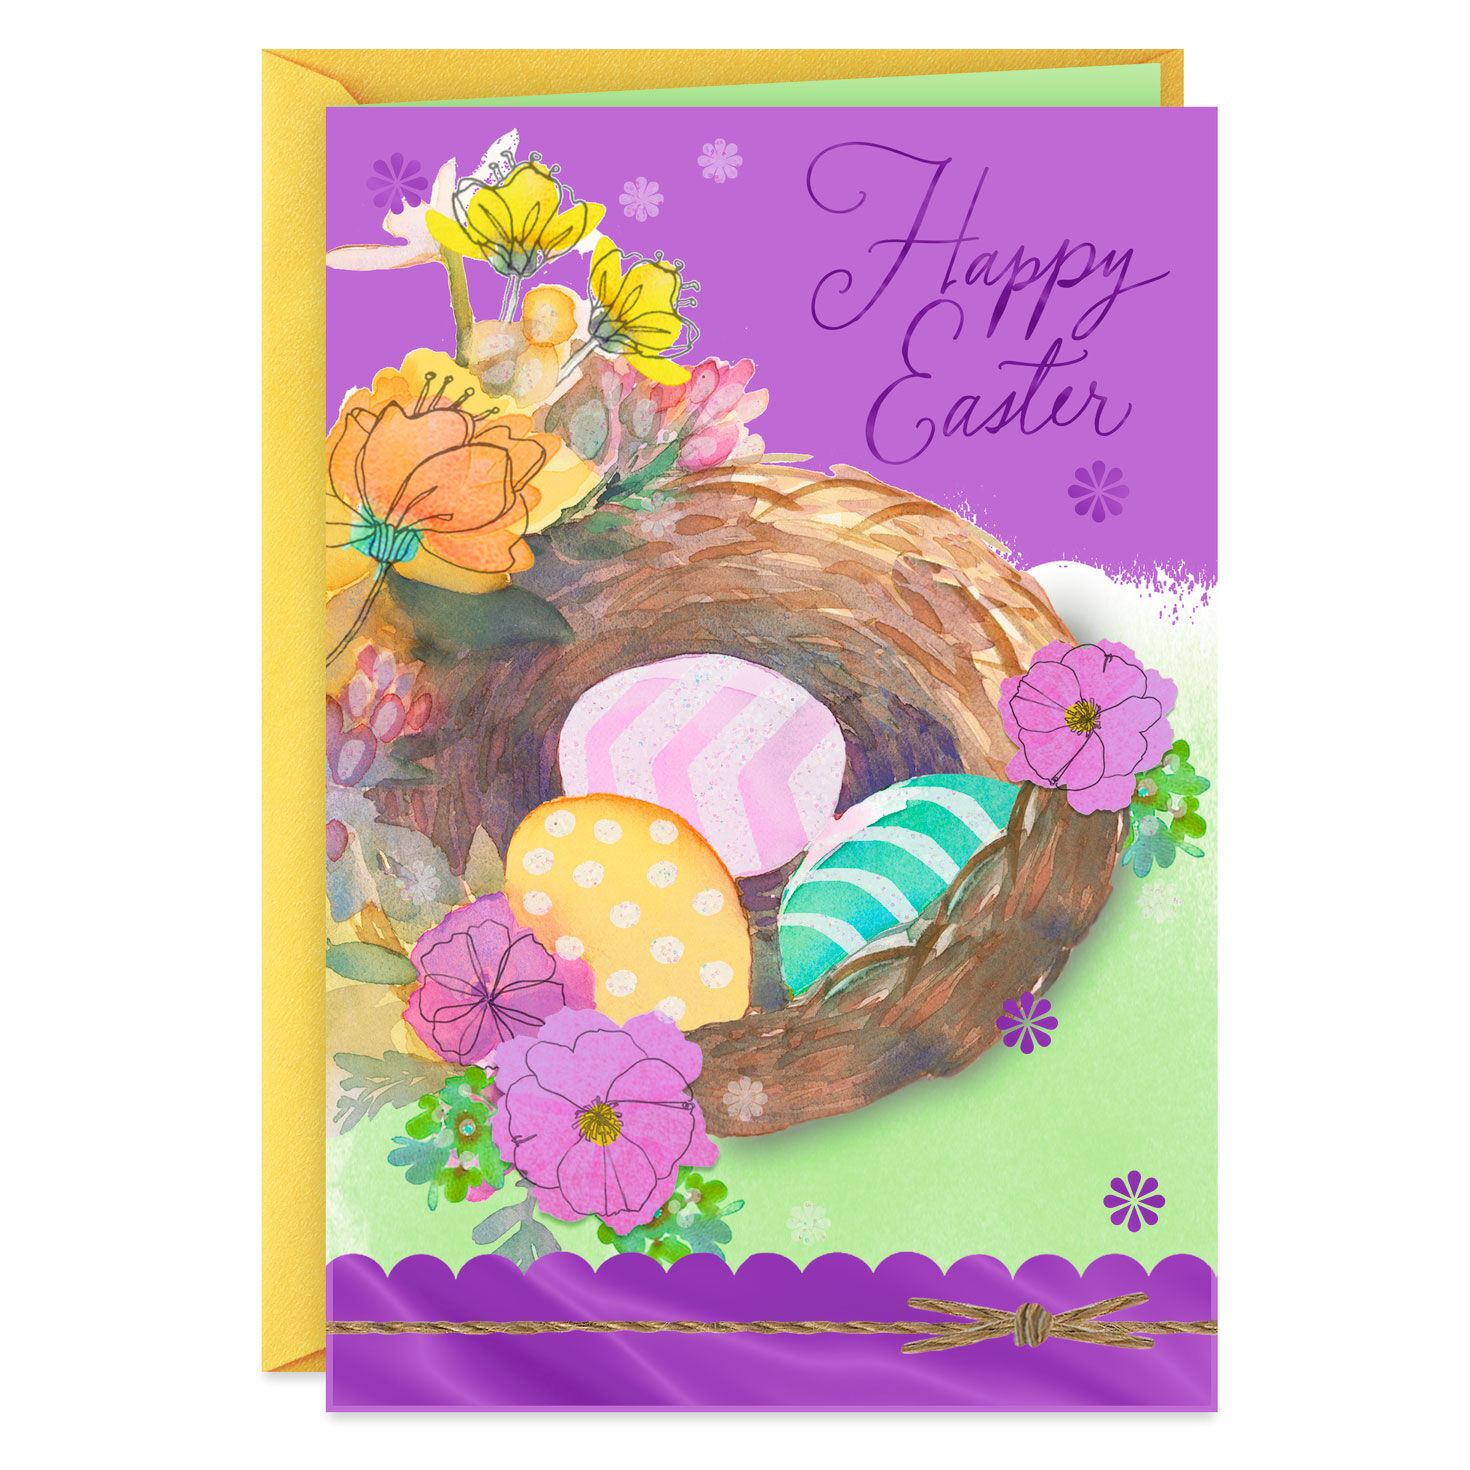 Details about   Hallmark Signature Collection Easter Greeting Card 